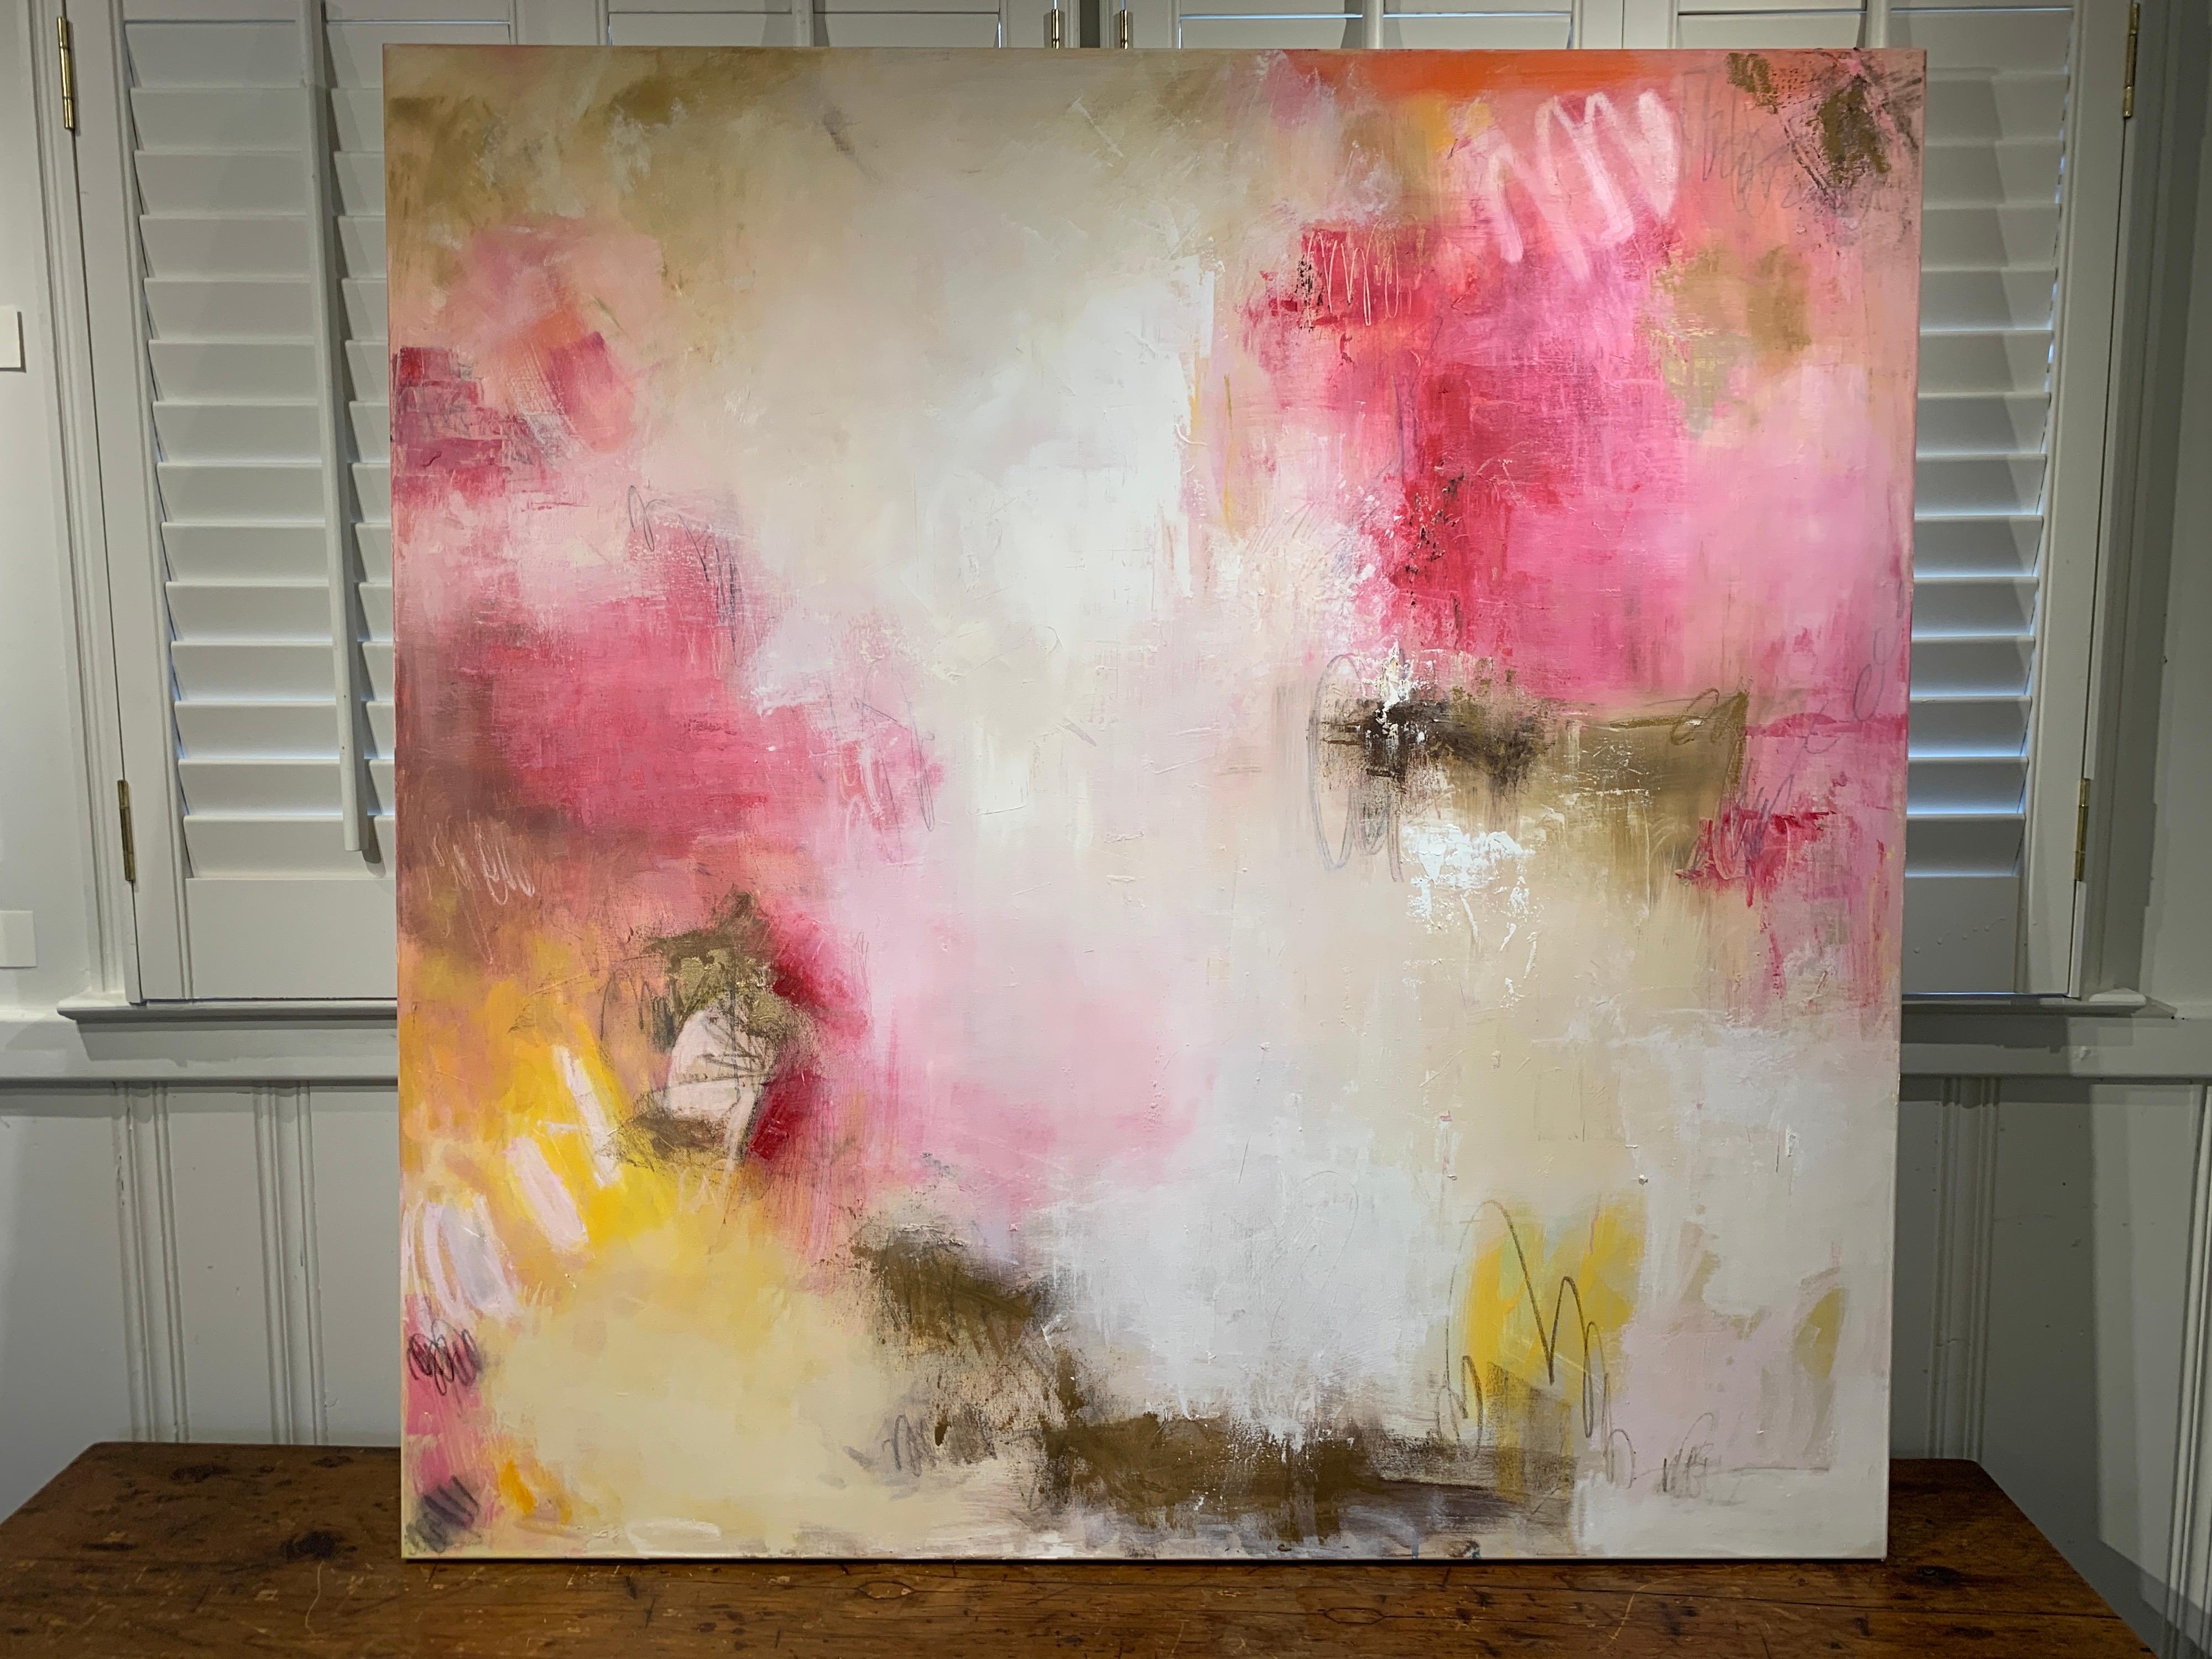 Poppies by Lily Harrington, Large Abstract Painting on Canvas 7